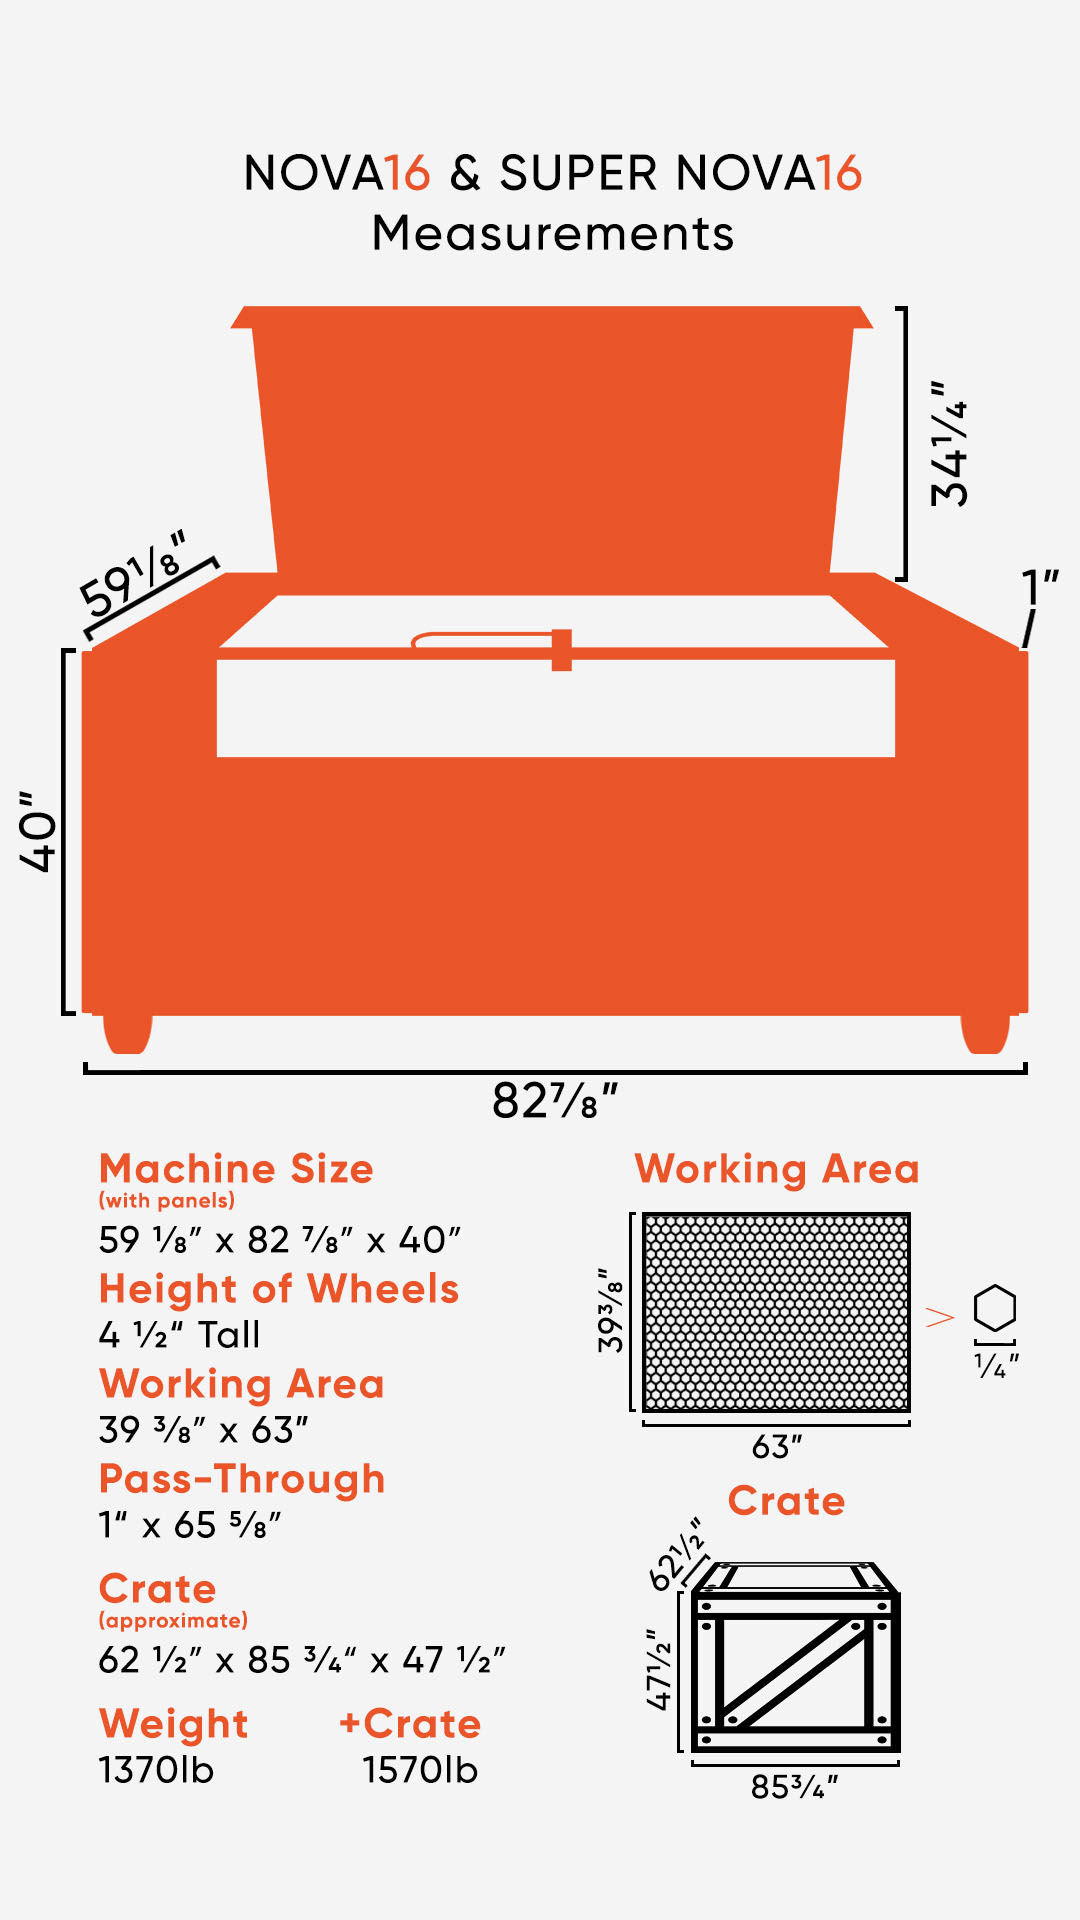 Graphic showing the dimensions of the NOVA 16 laser, crate size, and weight info